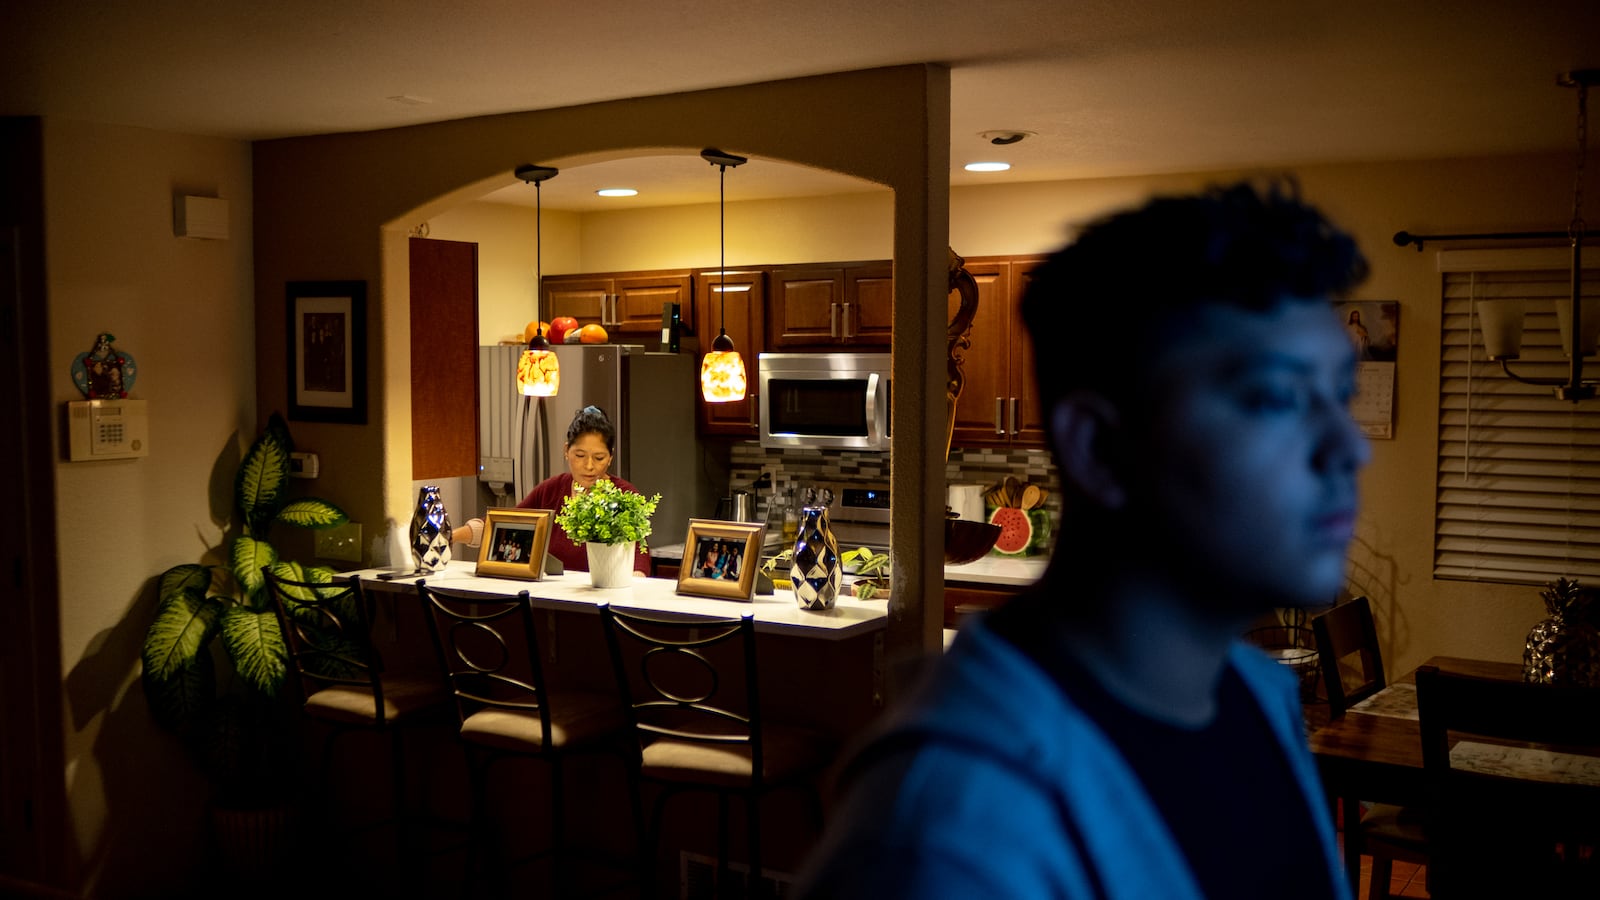 A mother works in the kitchen during an early morning as her son looks at the television in the living room, its blue light reflecting off of his face.